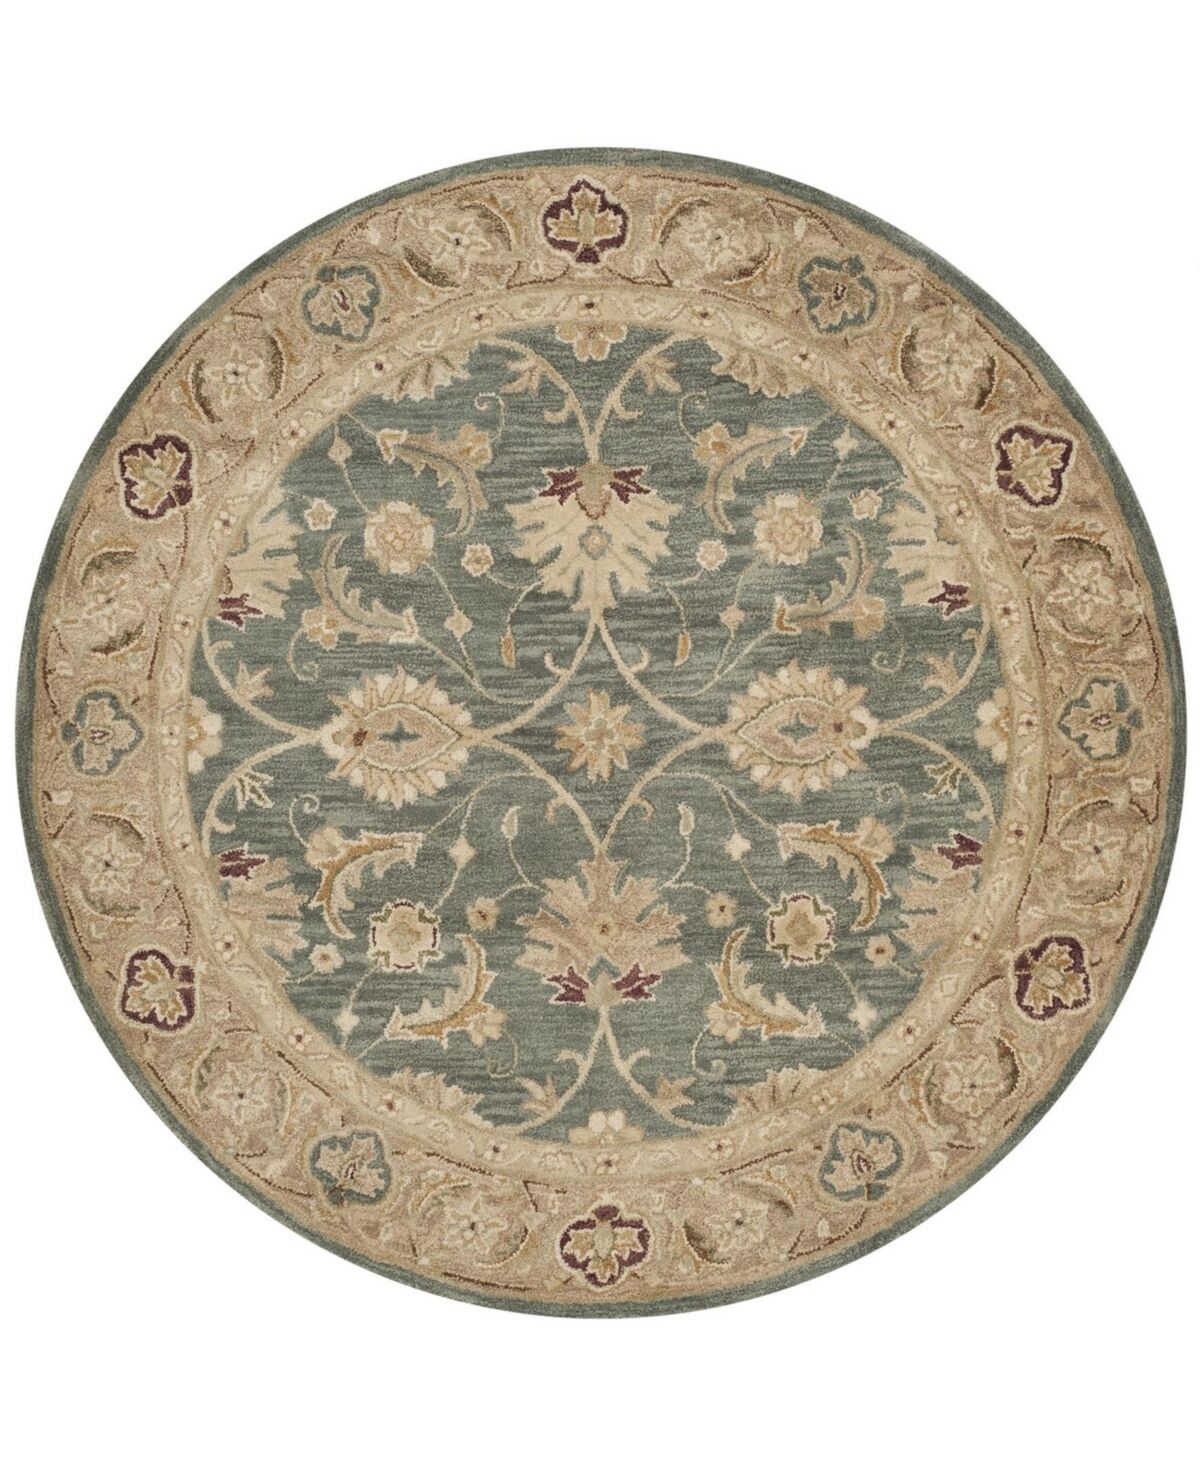 Safavieh Antiquity At849 Teal and Taupe 6' x 6' Round Area Rug - Teal